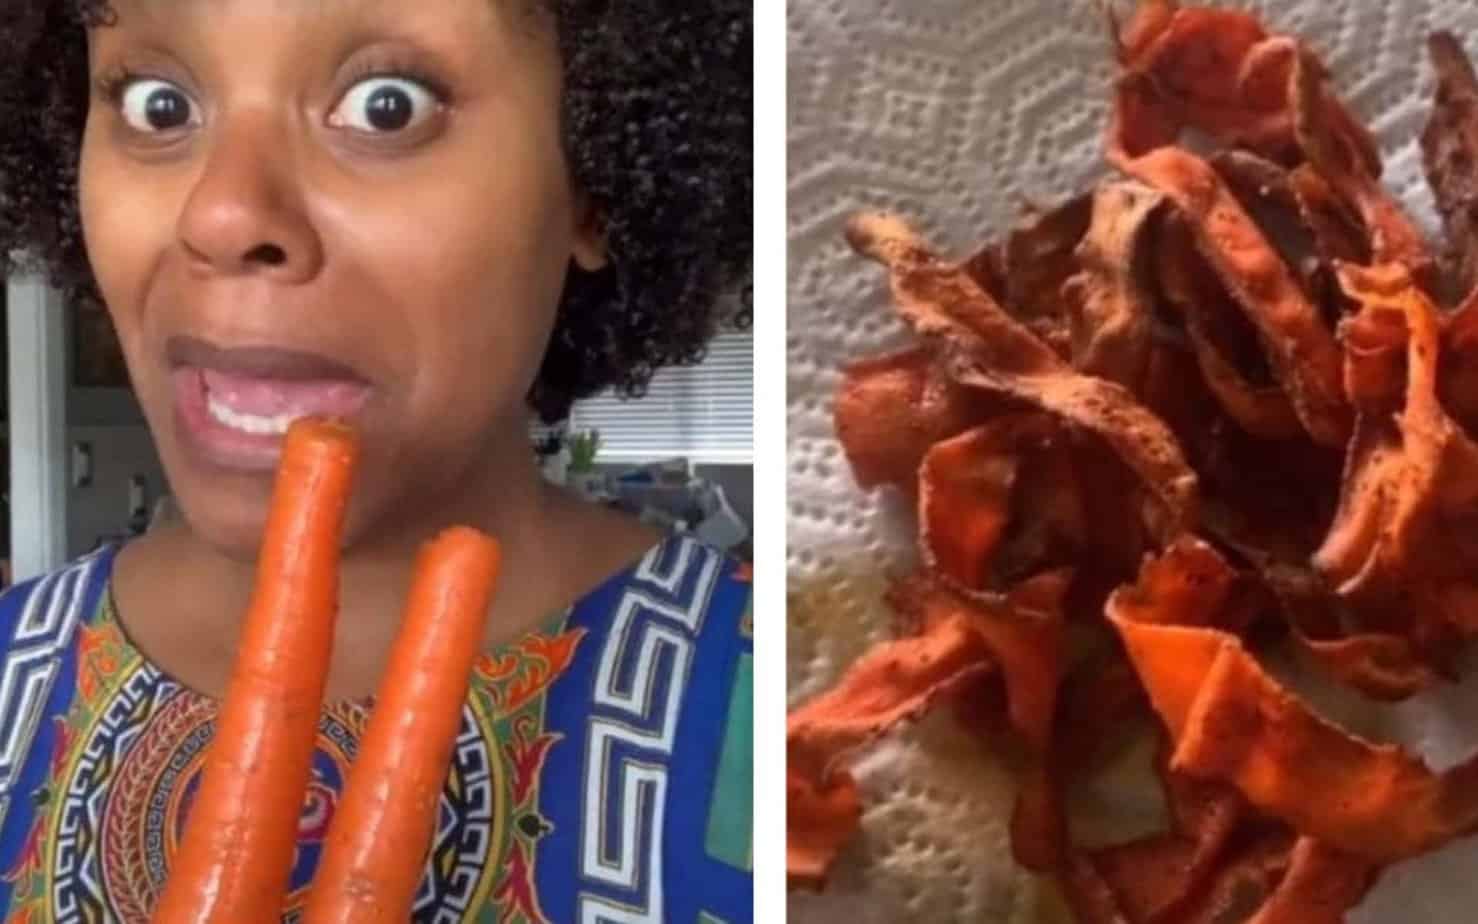 Woman makes Bacon out of... Carrots? - Tabitha Brown finds success in unprecedented response